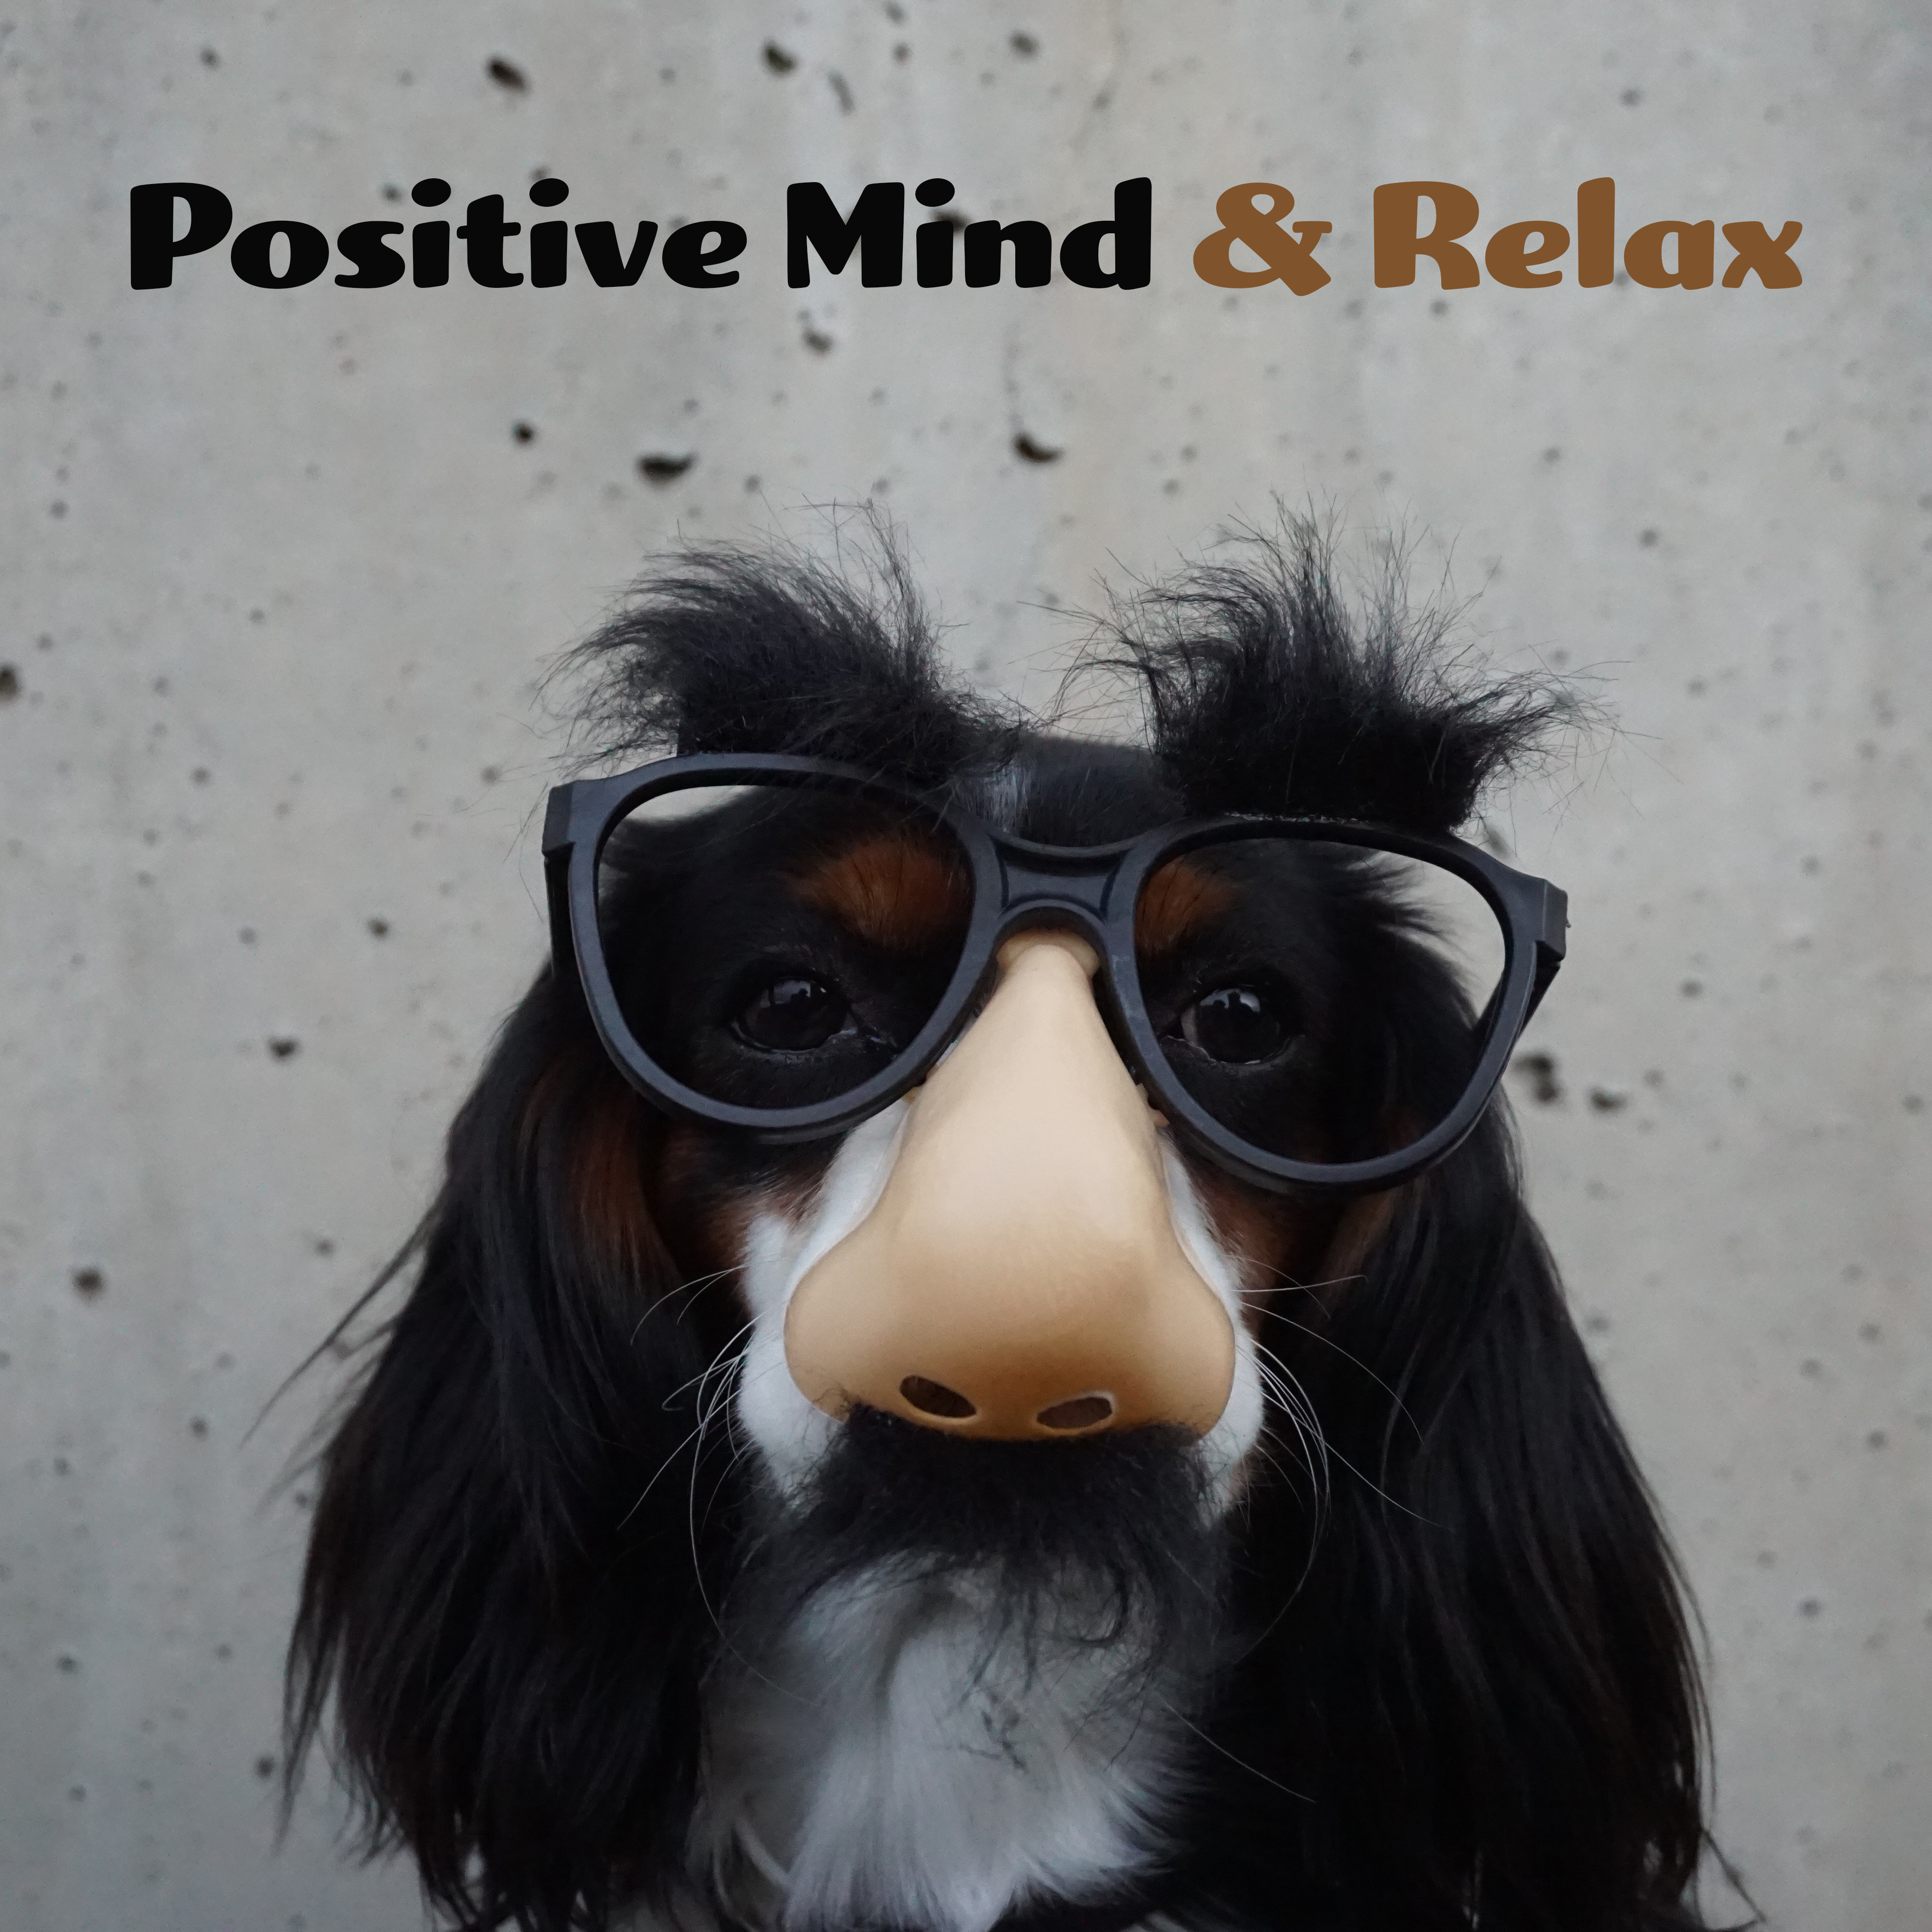 Positive Mind & Relax